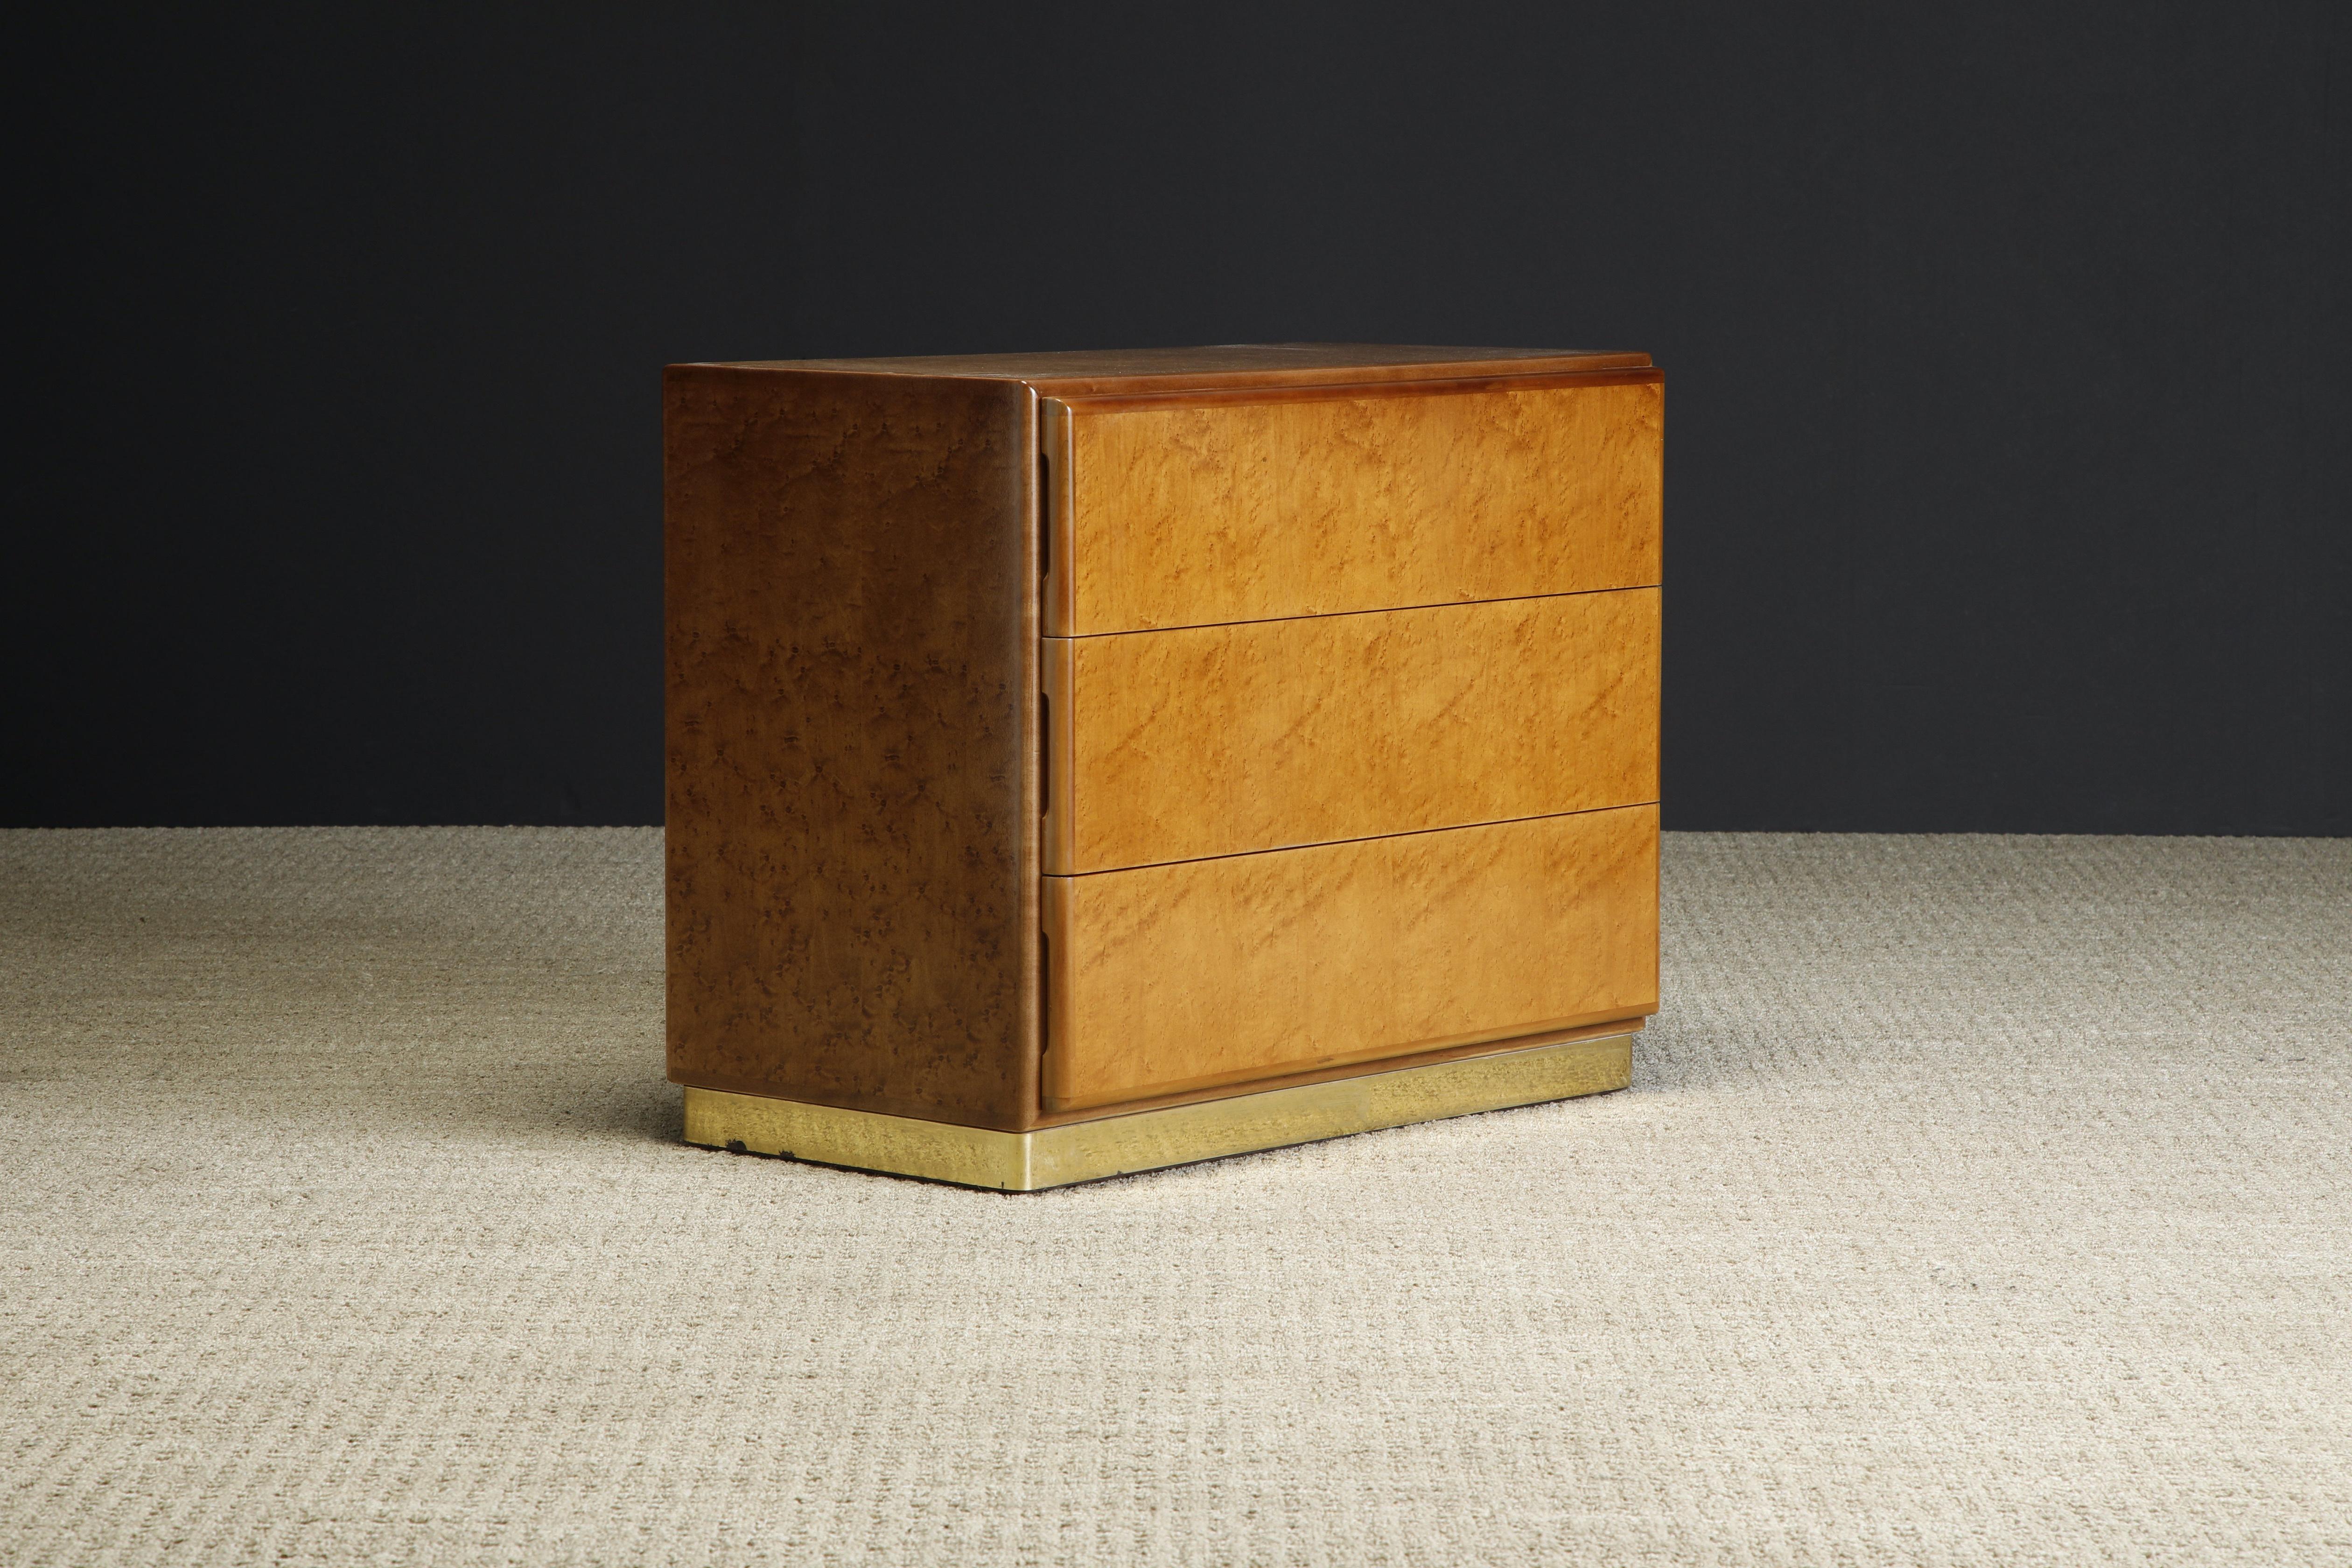 This pair of refinished large nightstands which also function great as end tables or small chests / cabinets are by Milo Baughman for Thayer Coggin. From the 